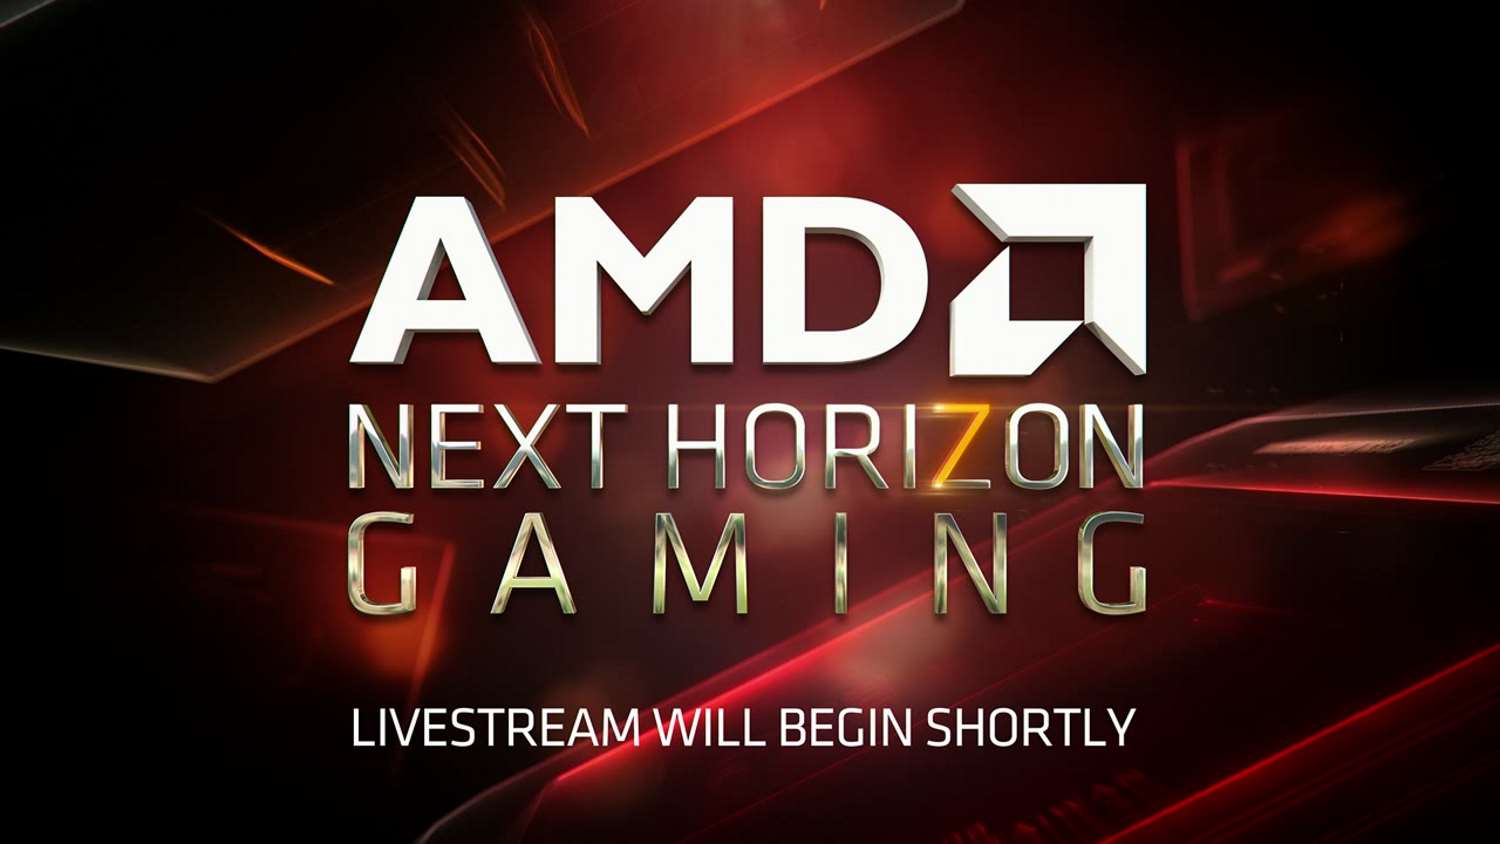 Watch E3’s AMD Next Horizon Gaming event right now 3pm PST, 11pm BST